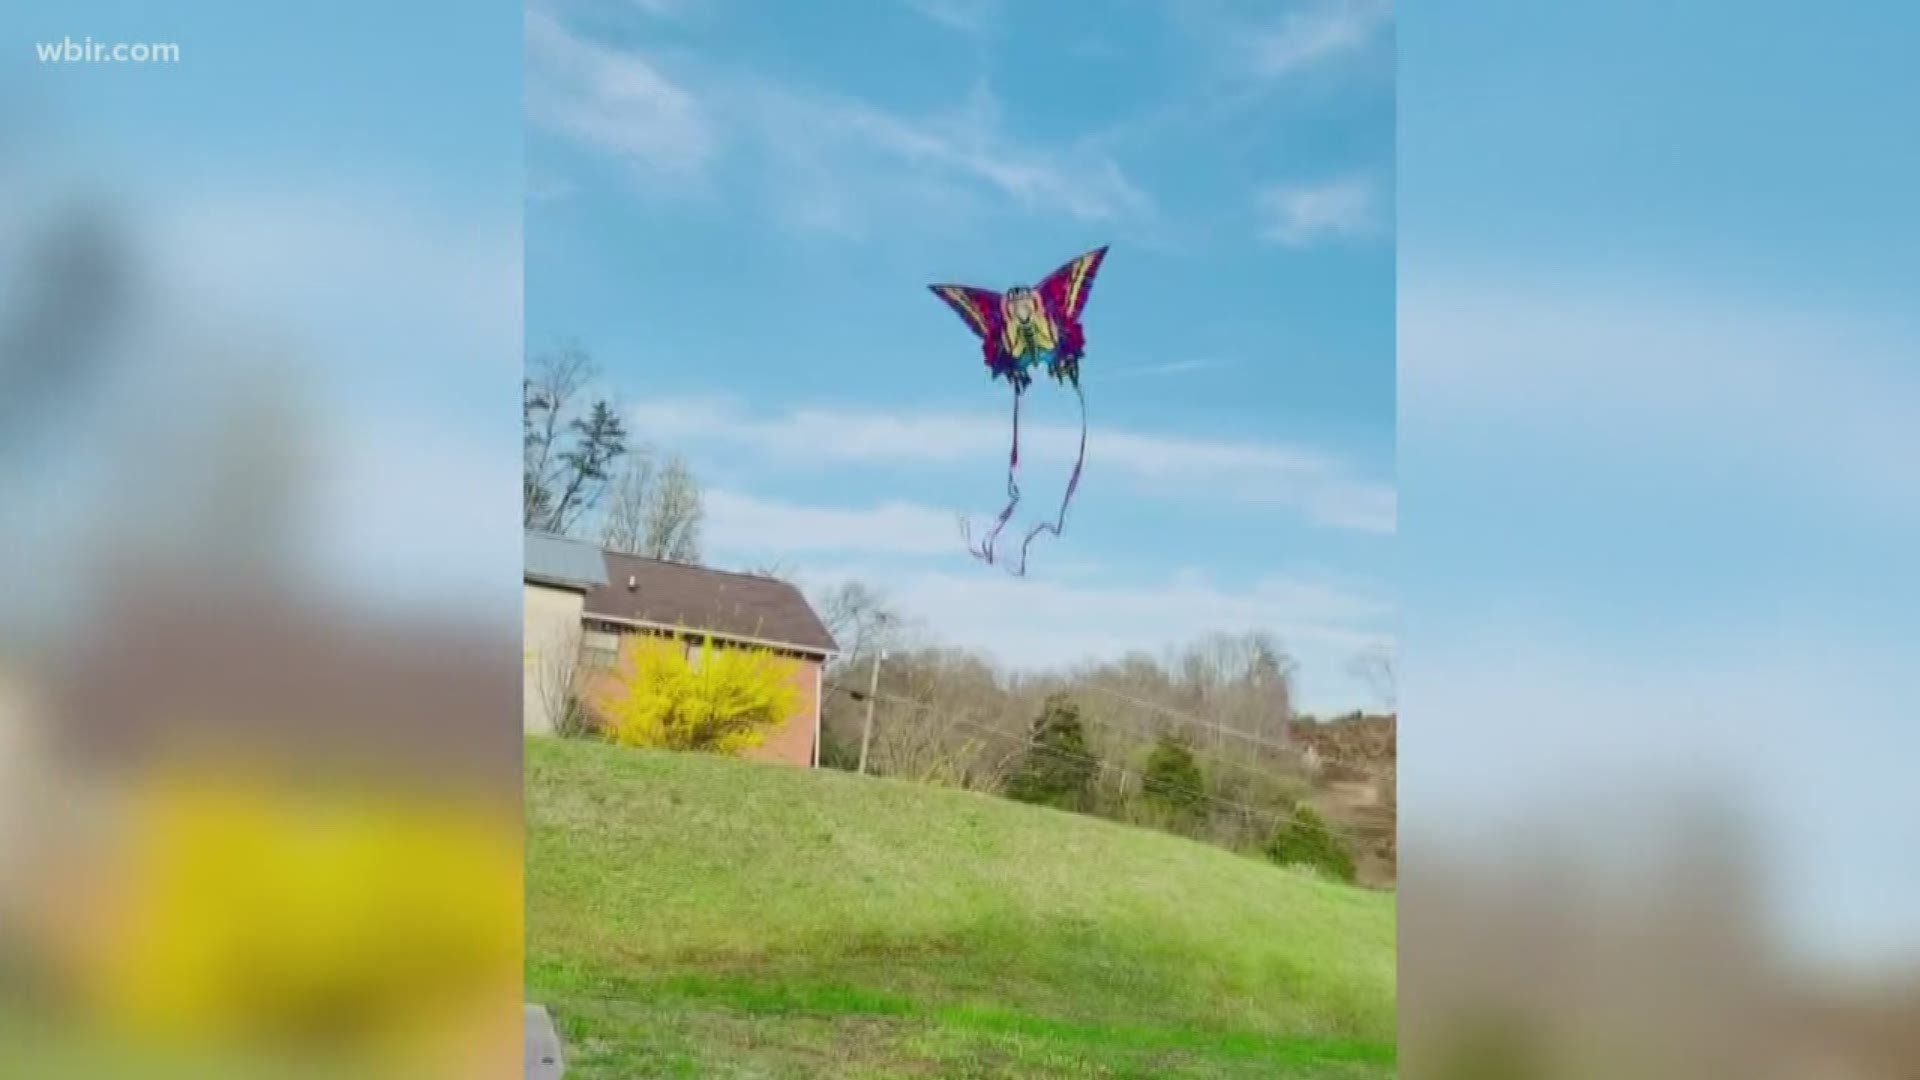 Some crazy catches, a wild golf shot and we even find time to fly a kite!